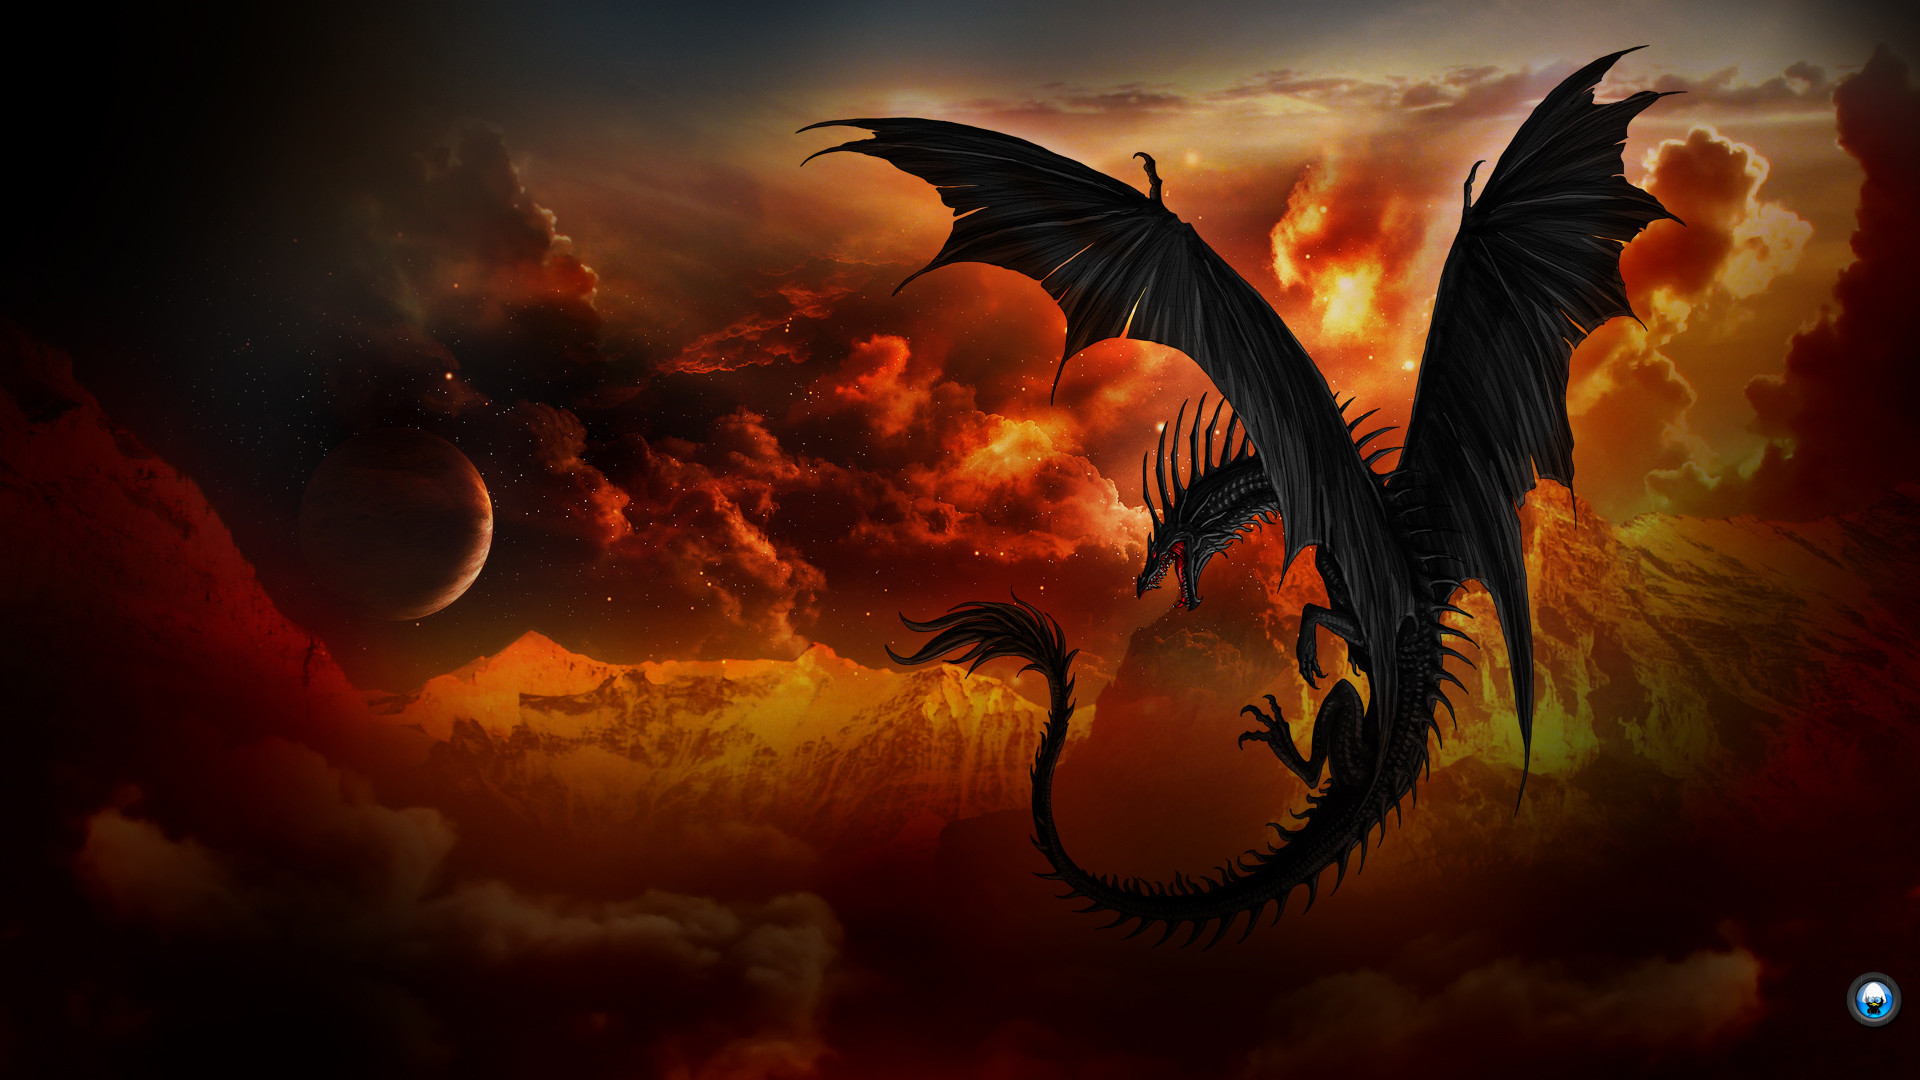 Download Free Lovely Dragon Wallpapers HD images